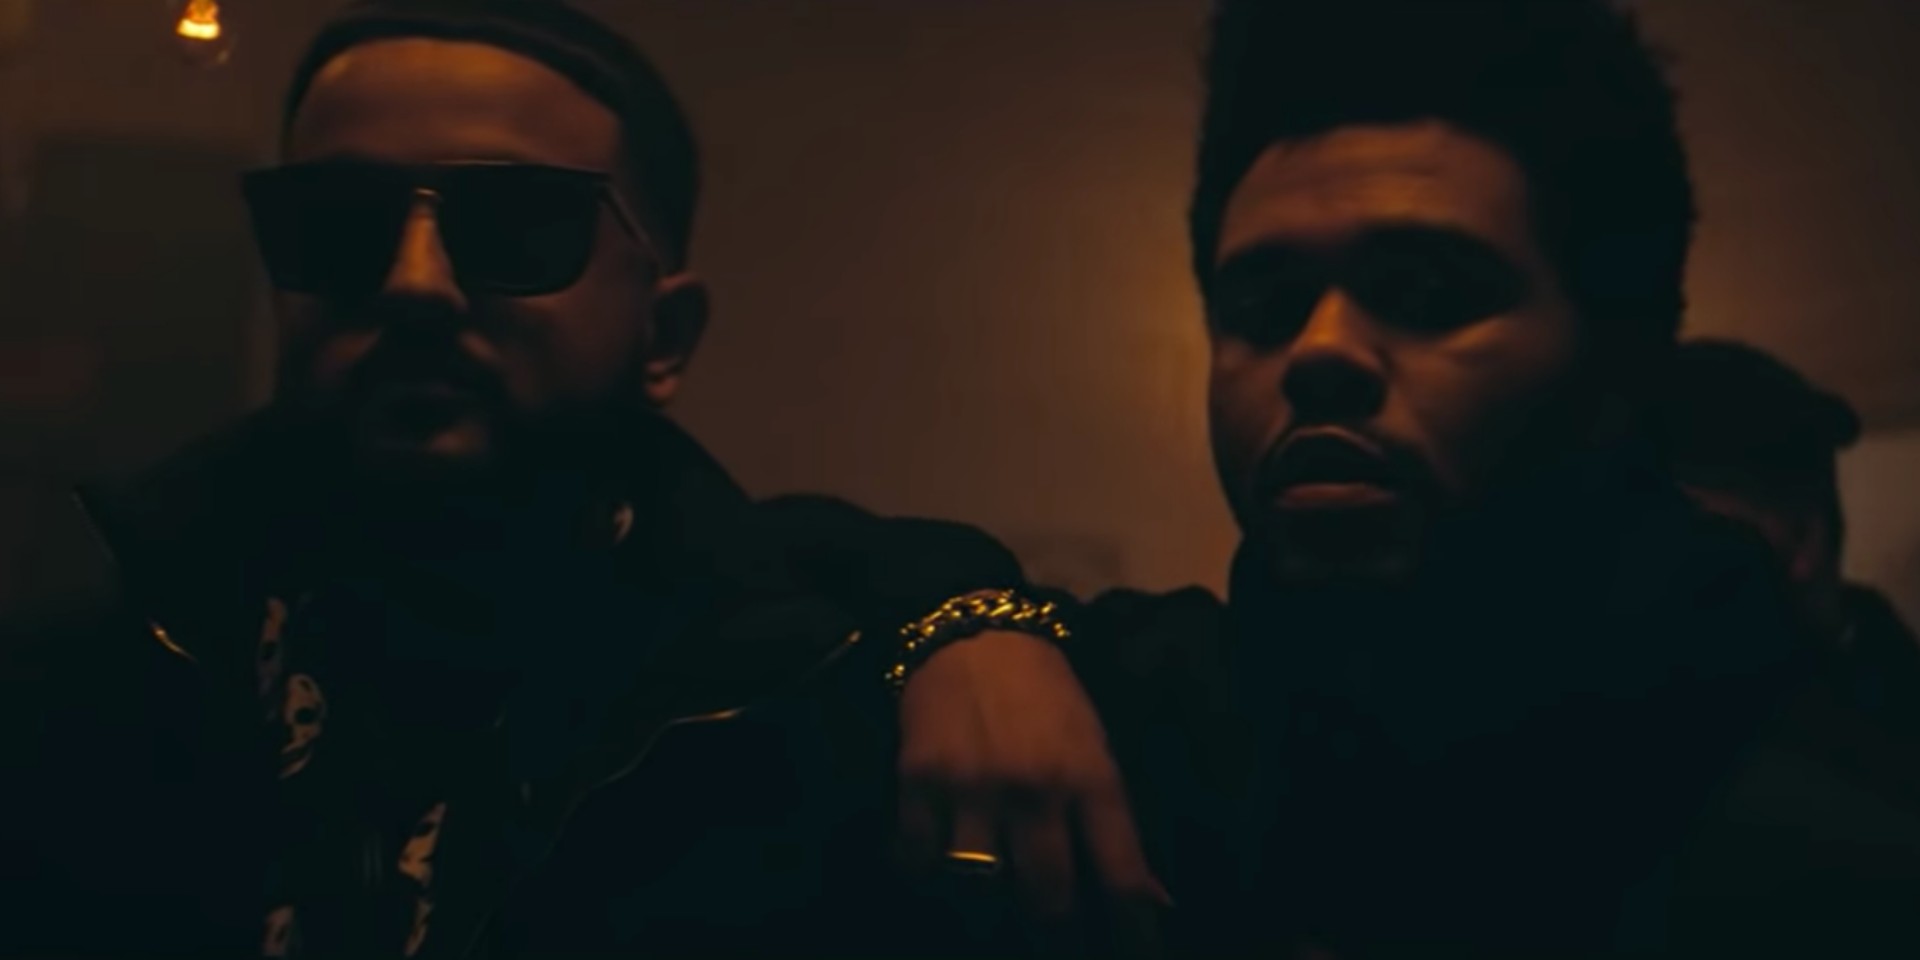 NAV and The Weeknd link up in dystopian music video for 'Price on My Head'